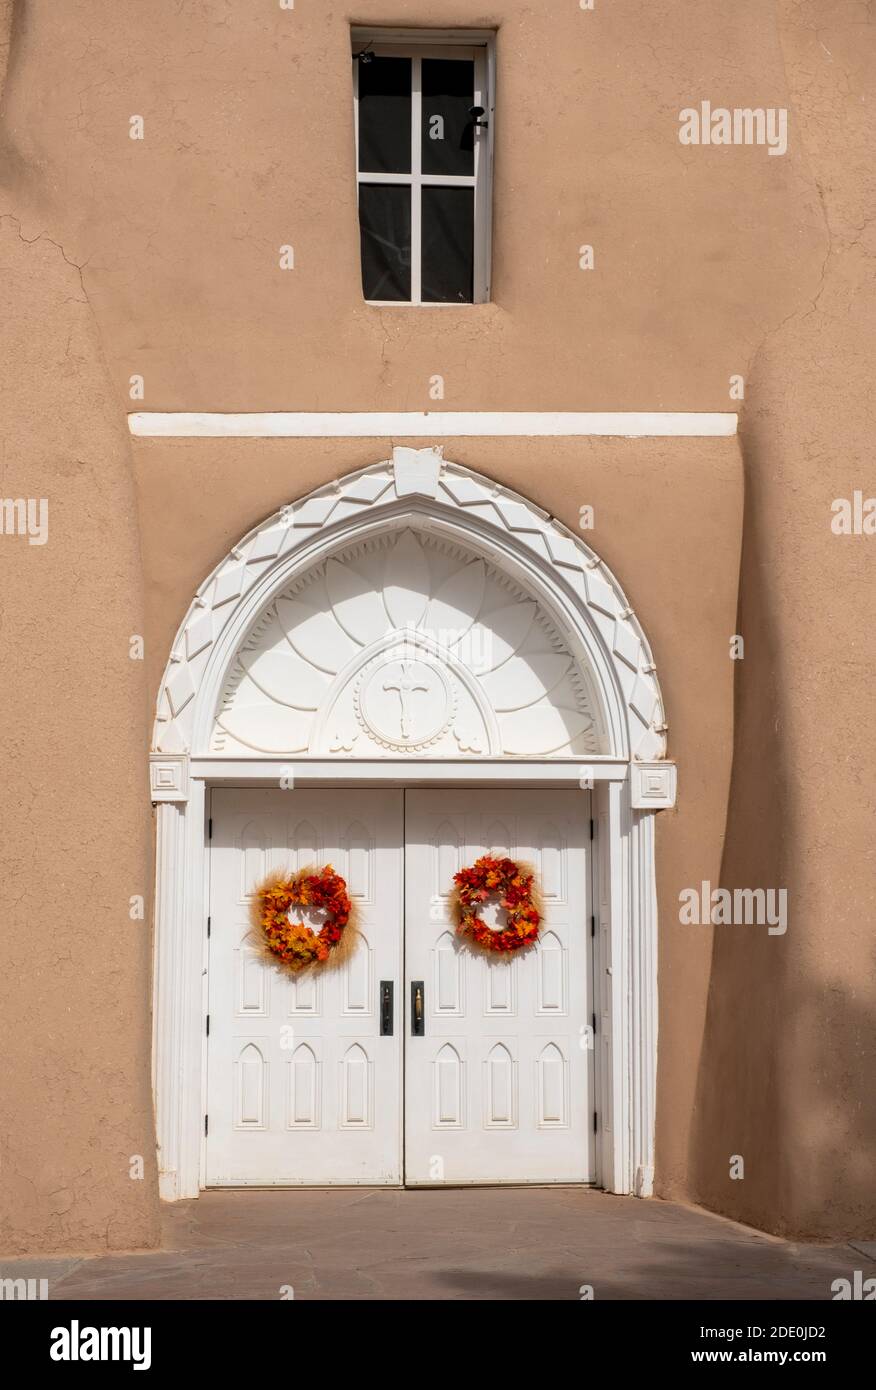 Die adobe Mission Church of San Francisco de Asis - St. Francis of Assissi - in Ranchos de Taos, New Mexico, USA Stockfoto